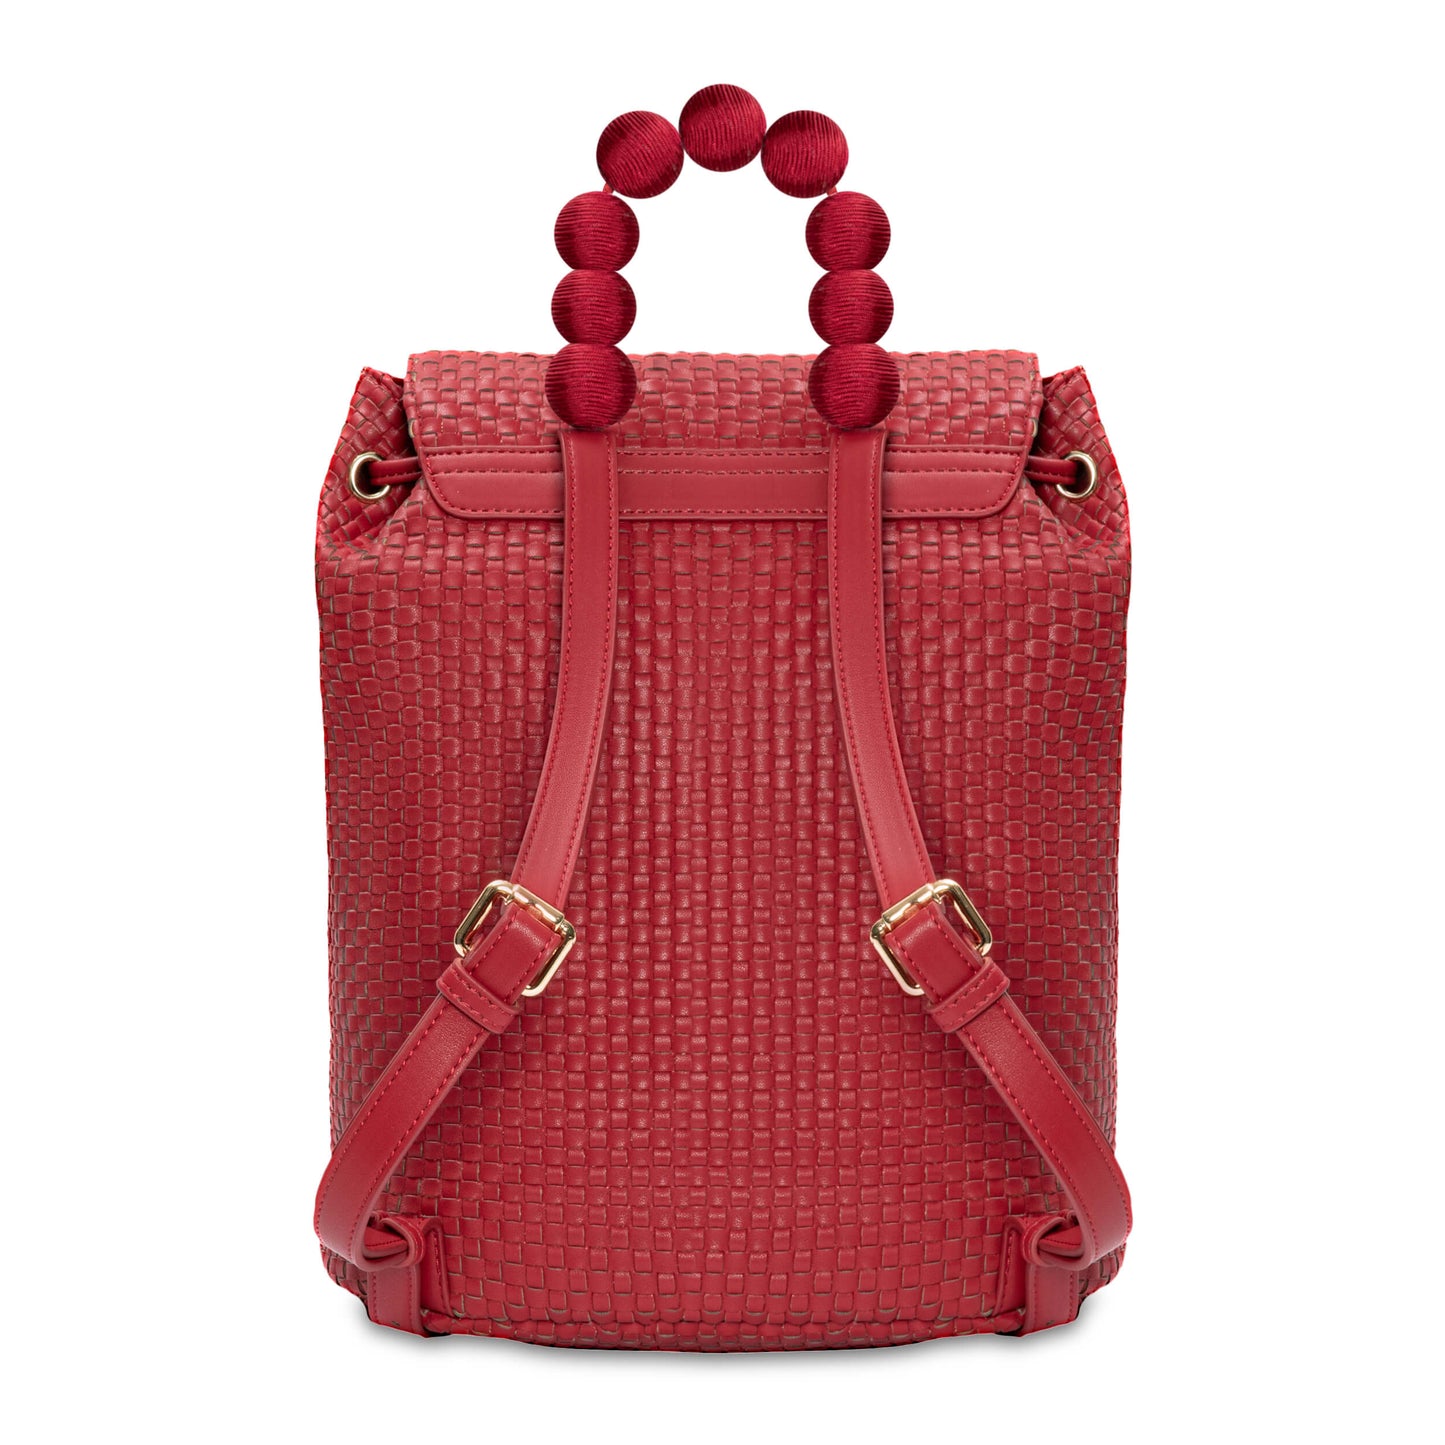 The Jael Backpack - Passion Red (Customizable)